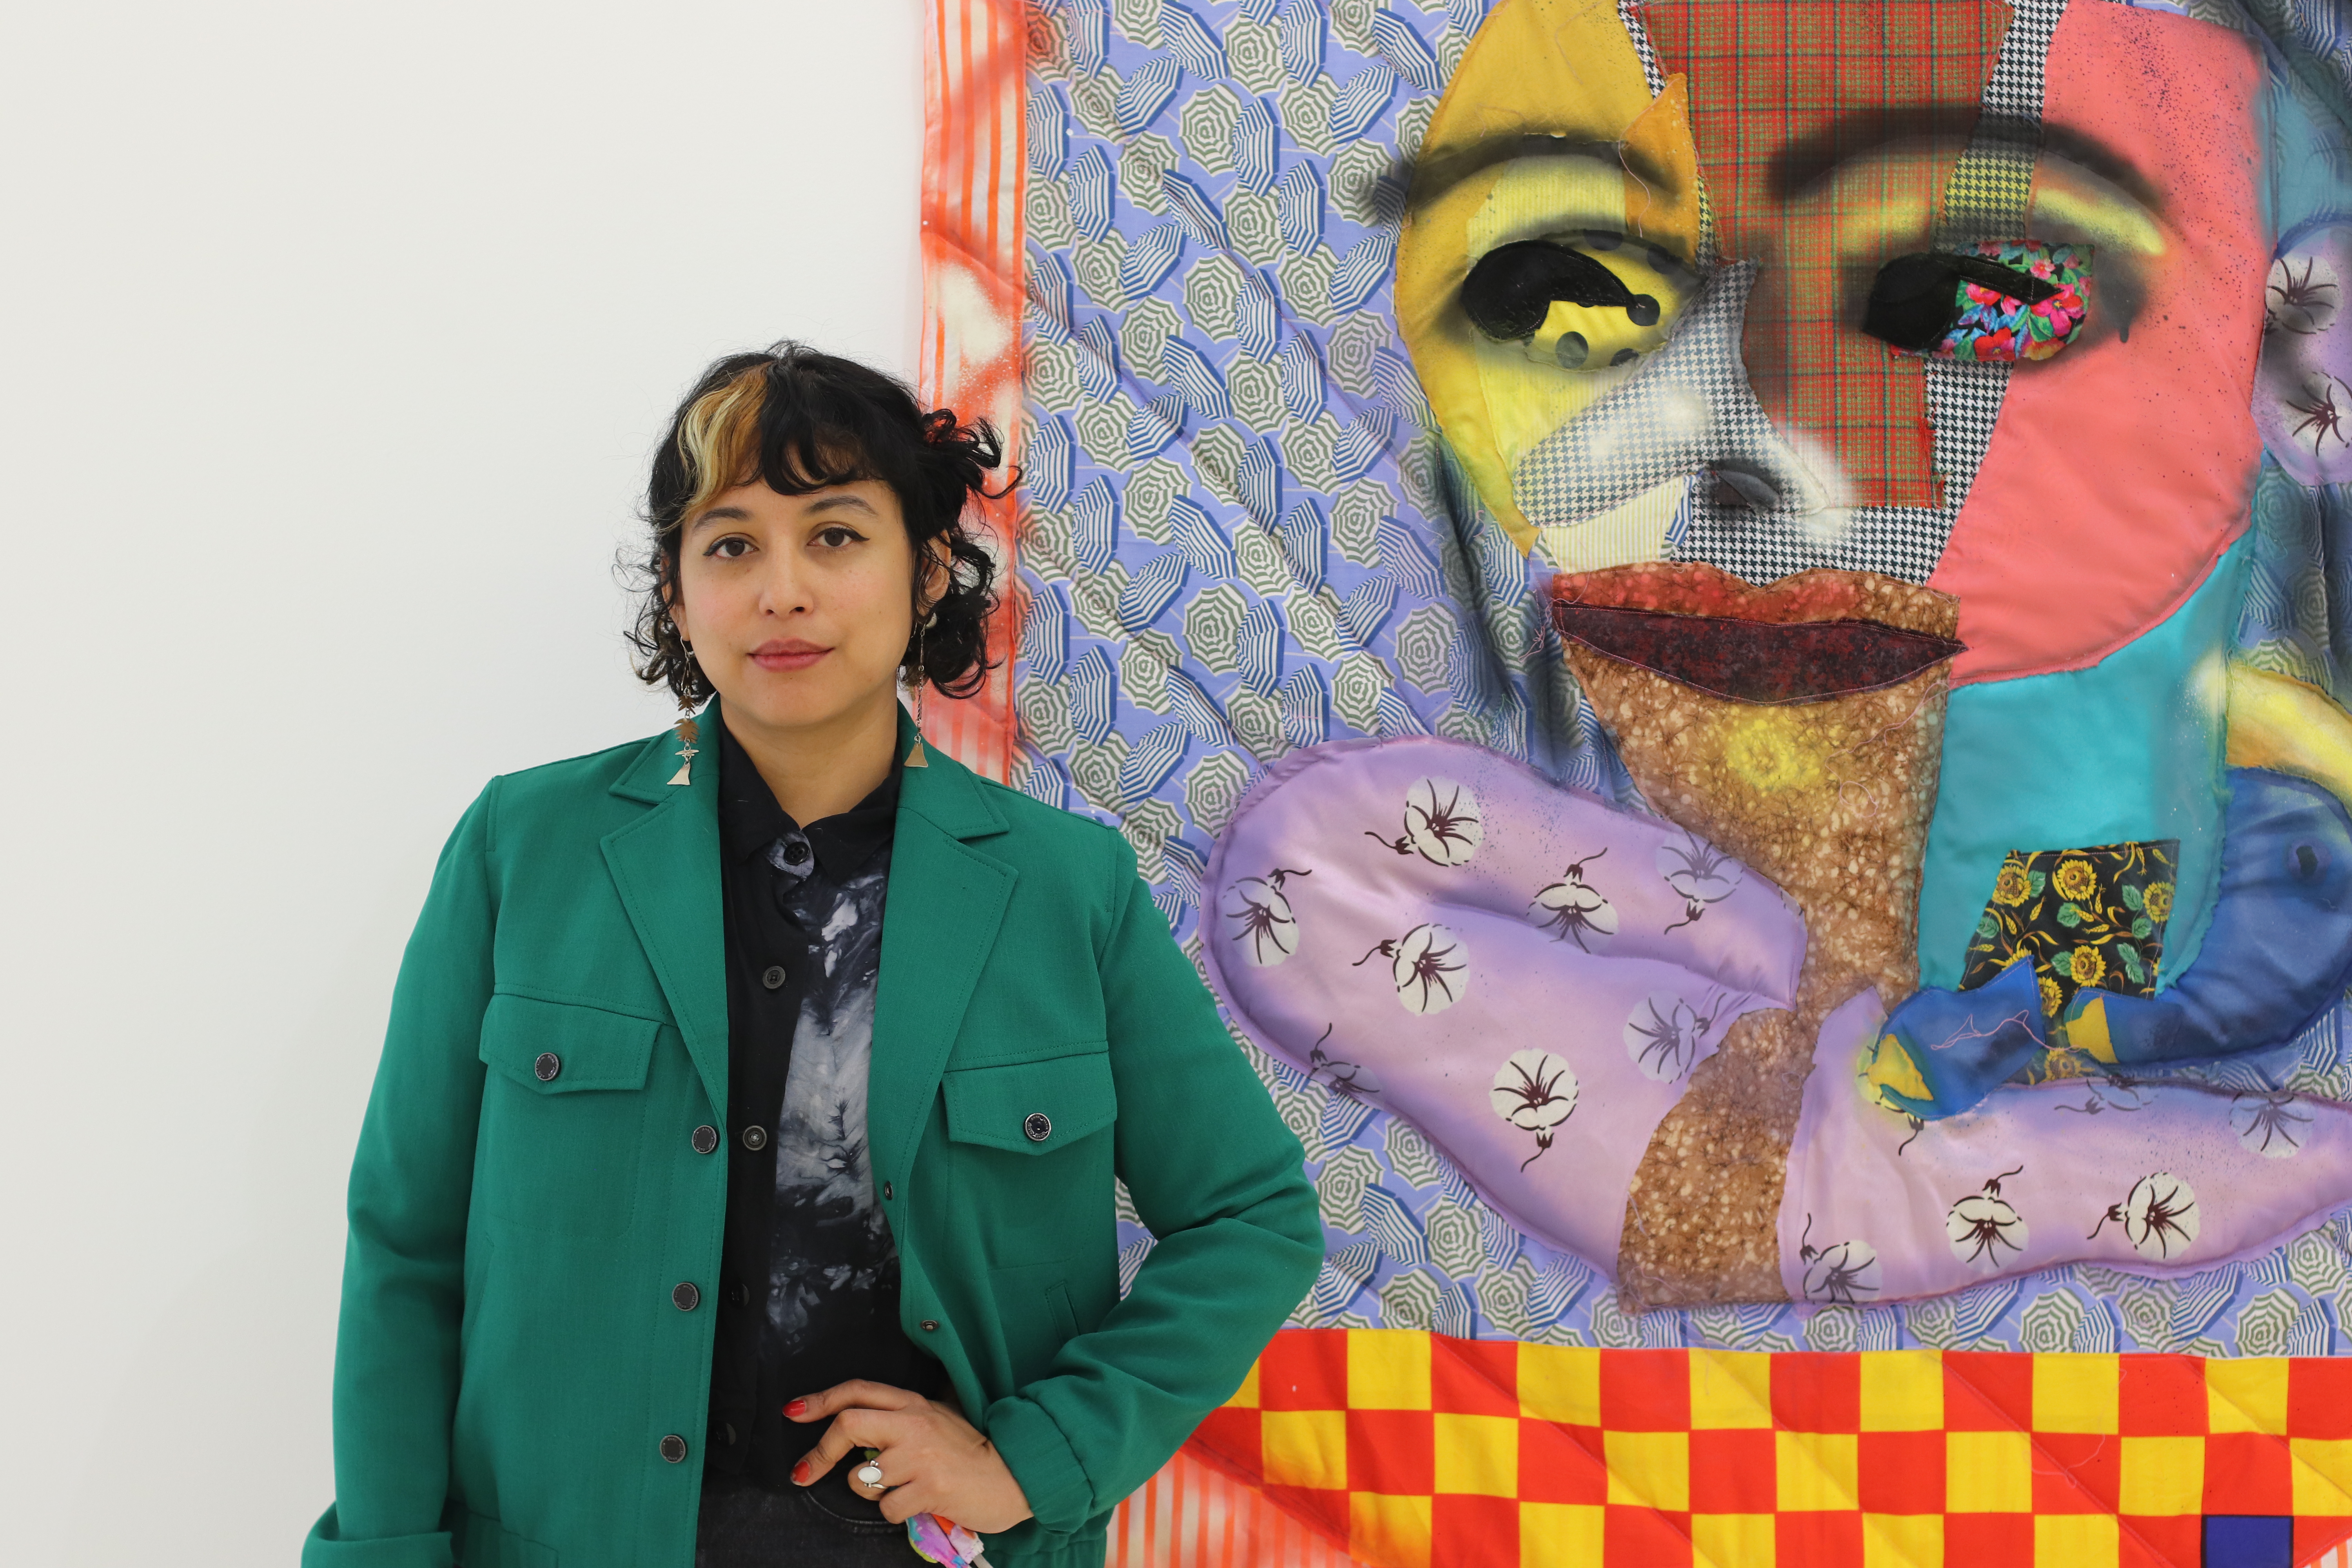 Maria Guzmán Capron standing in front of a colorful quilted artwork depicting a face.